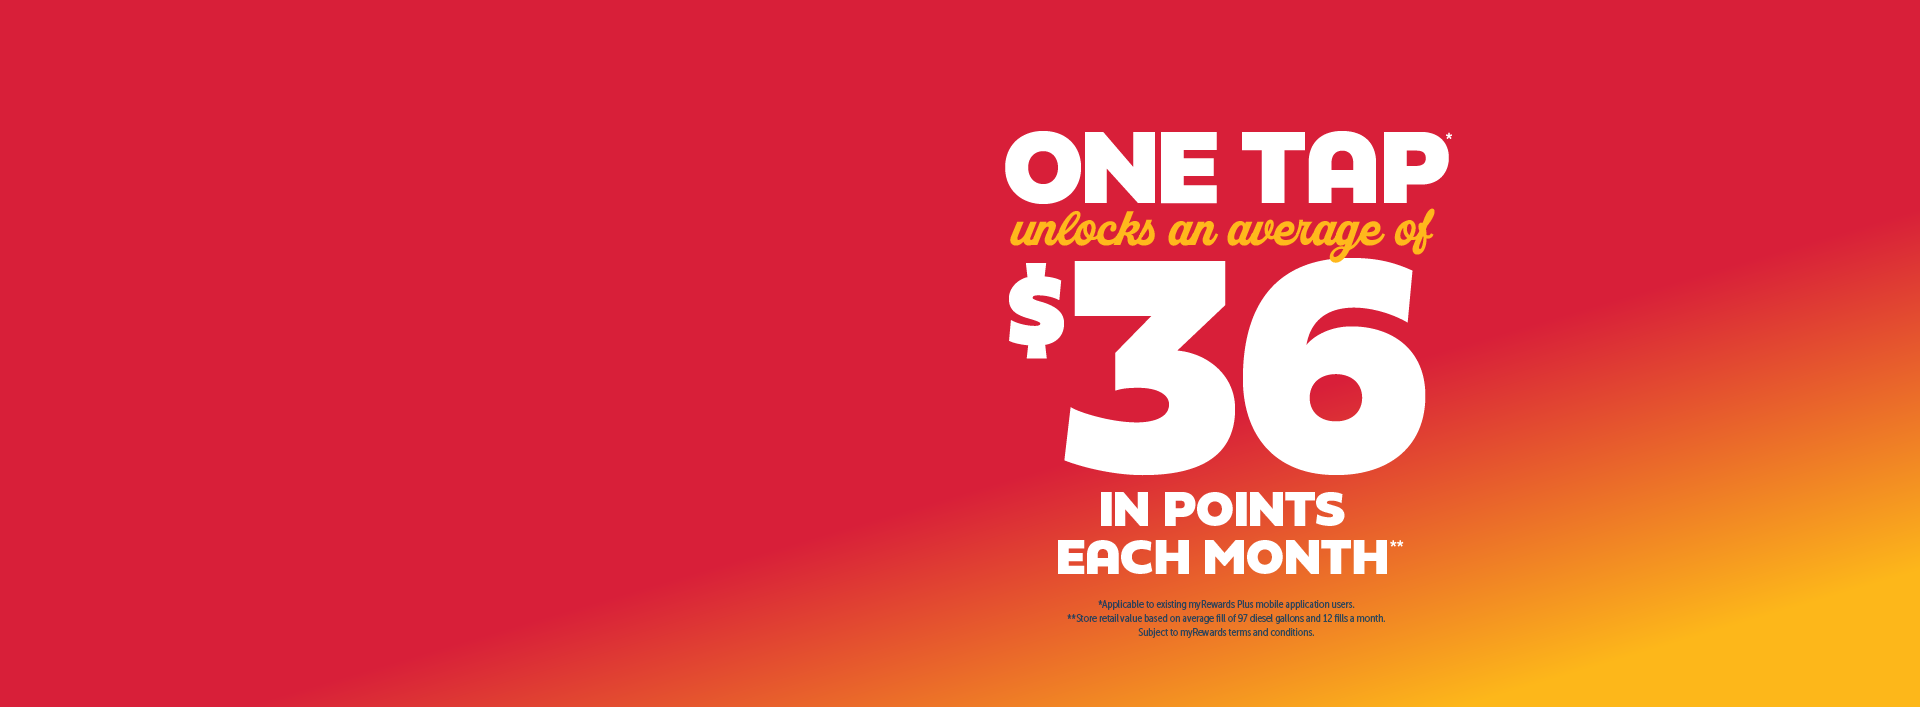 PushForPoints® - Save an average of $36/month in points